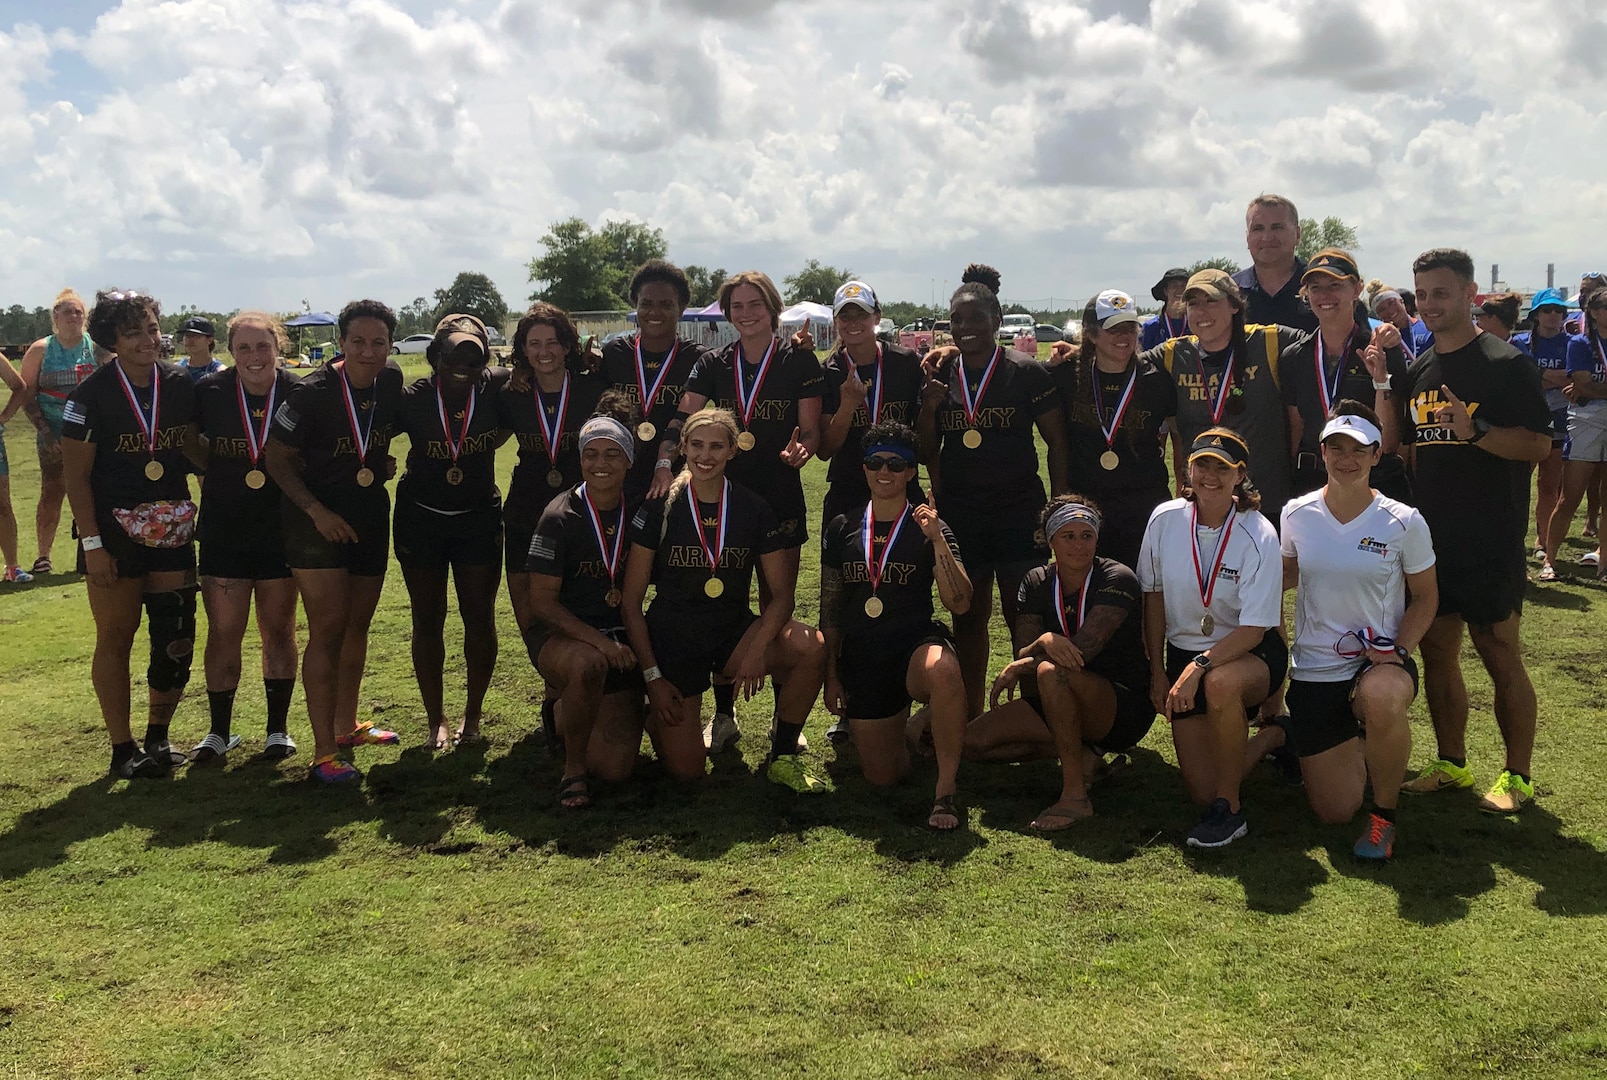 Army wins gold at the 2021 Armed Forces Rugby Championship held in conjunction with the 2021 Cape Fear Rugby Sevens Tournament, held from 24-28 June.  Service members from the Army, Marine Corps, Navy, Air Force (with Space Force personnel) and Coast Guard battle it out for gold.  (Department of Defense Photo, Released)